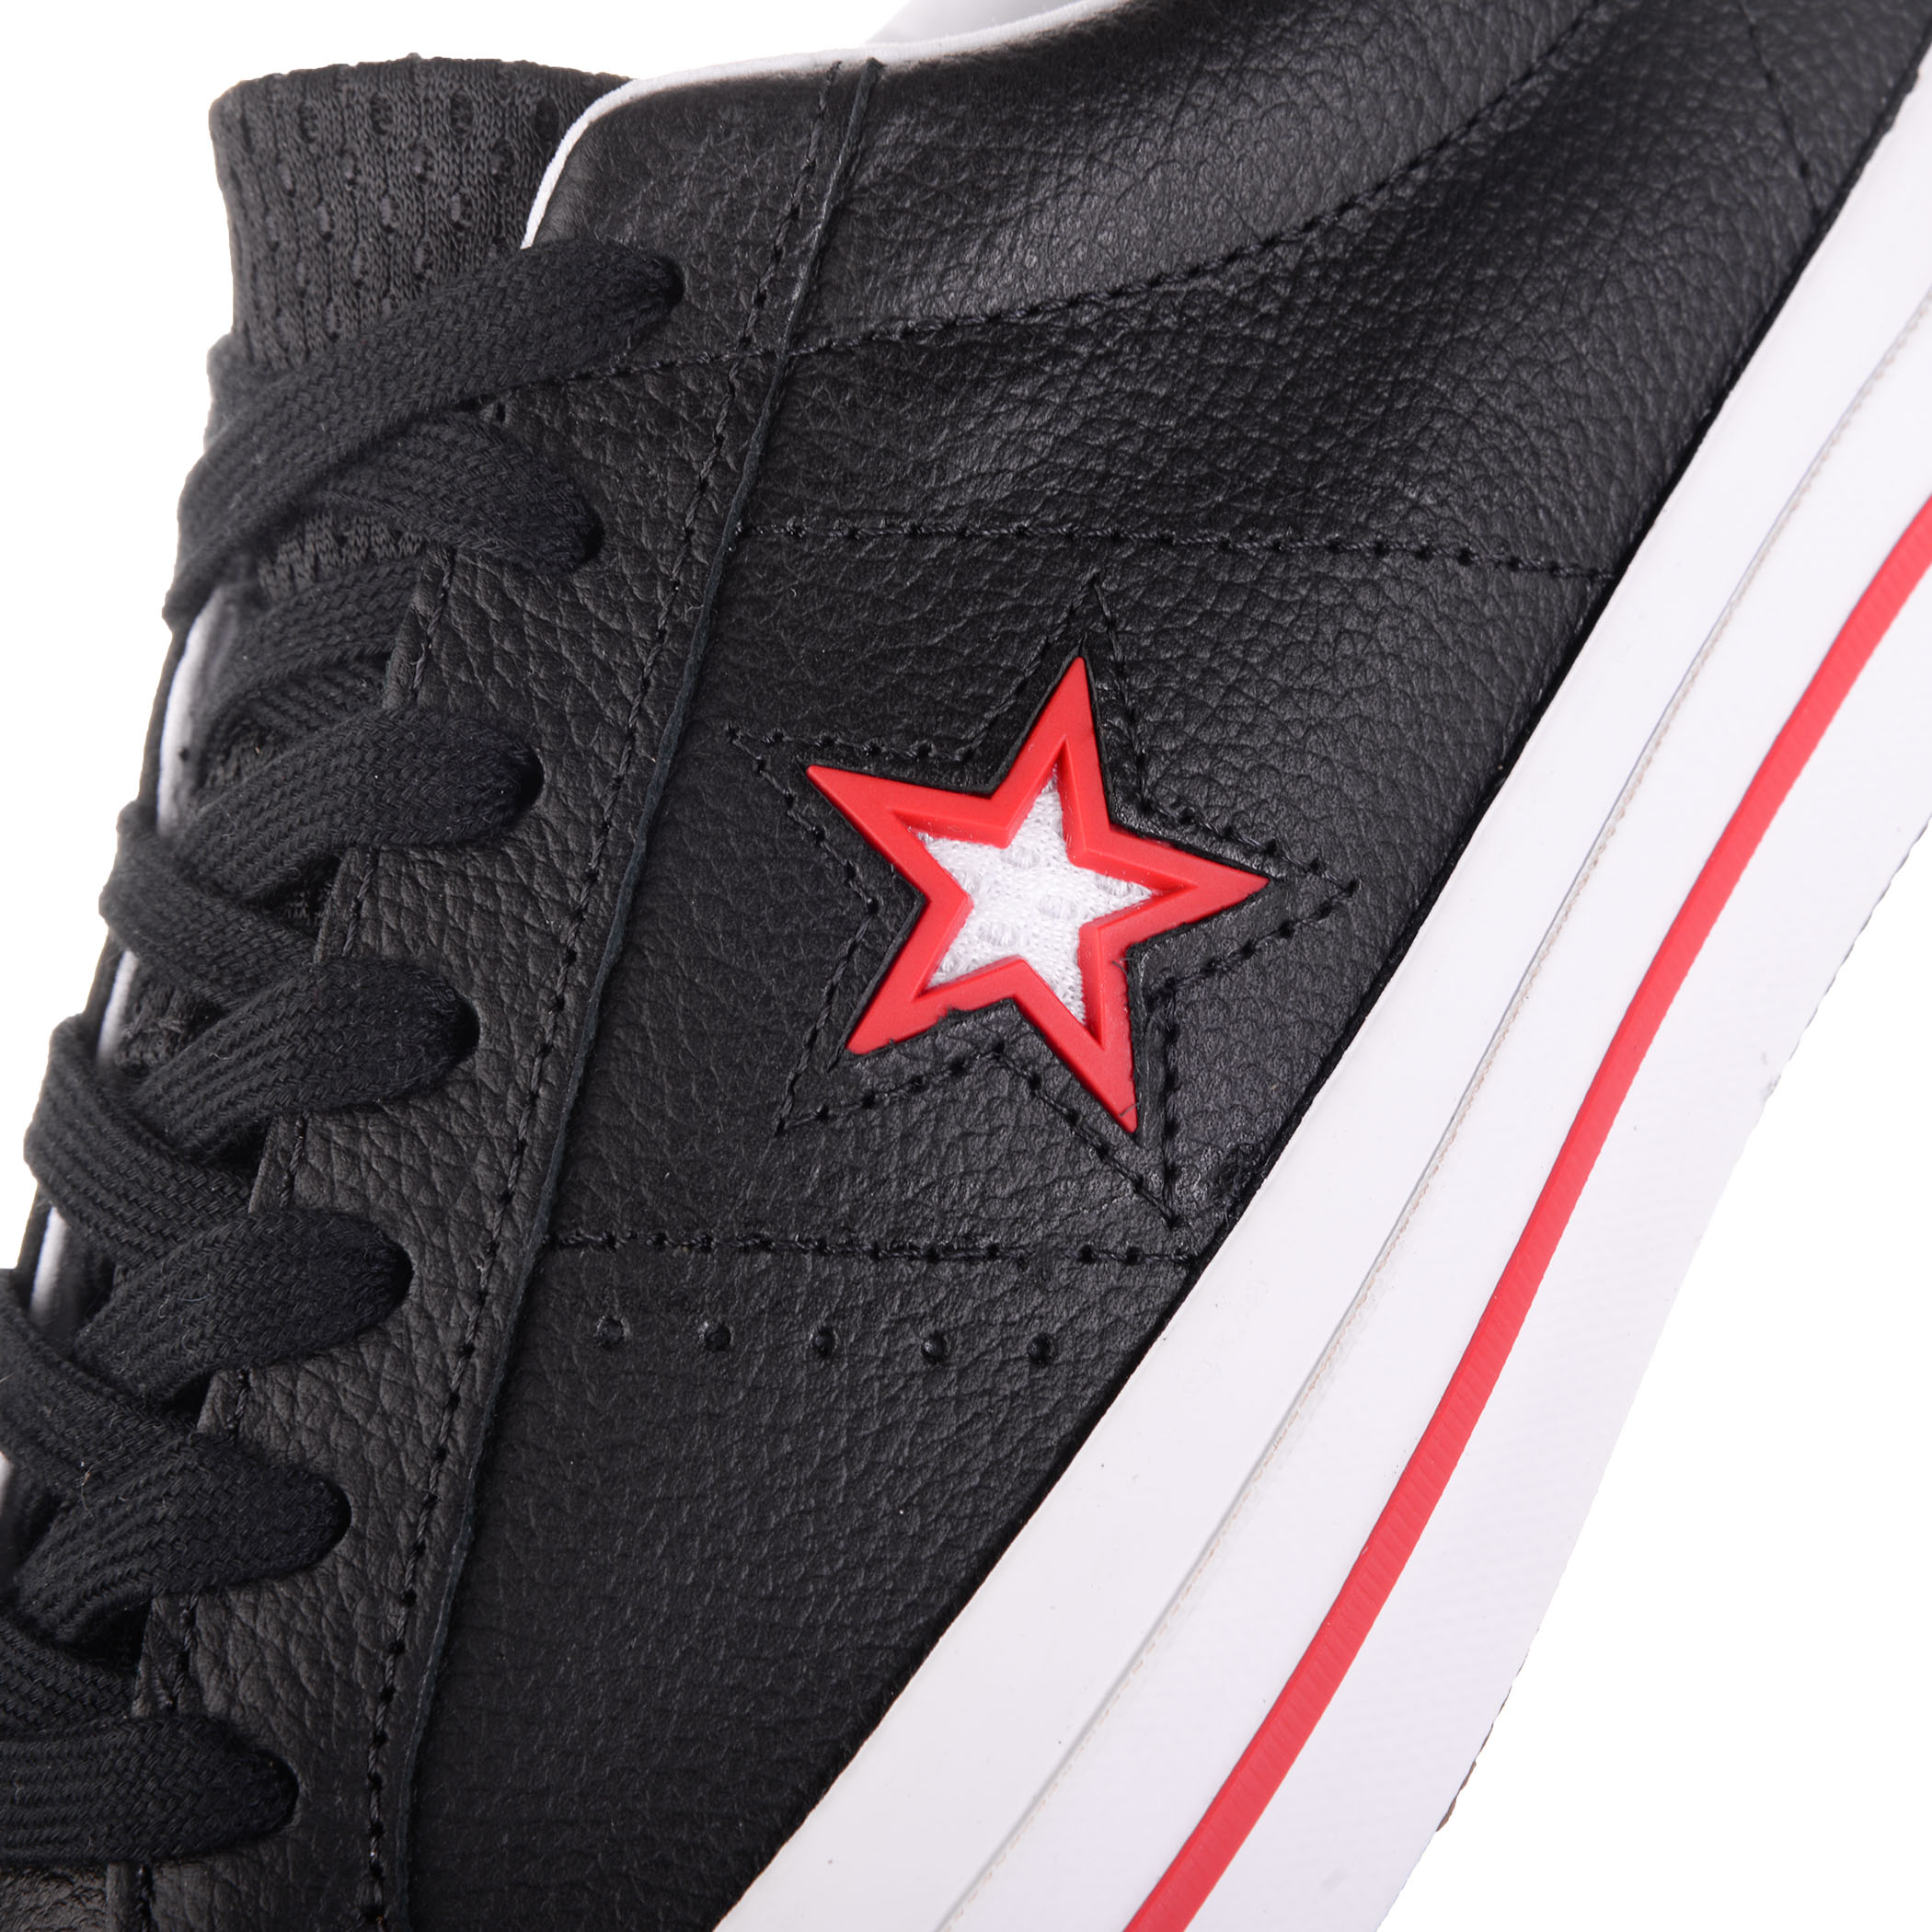 converse one star black red